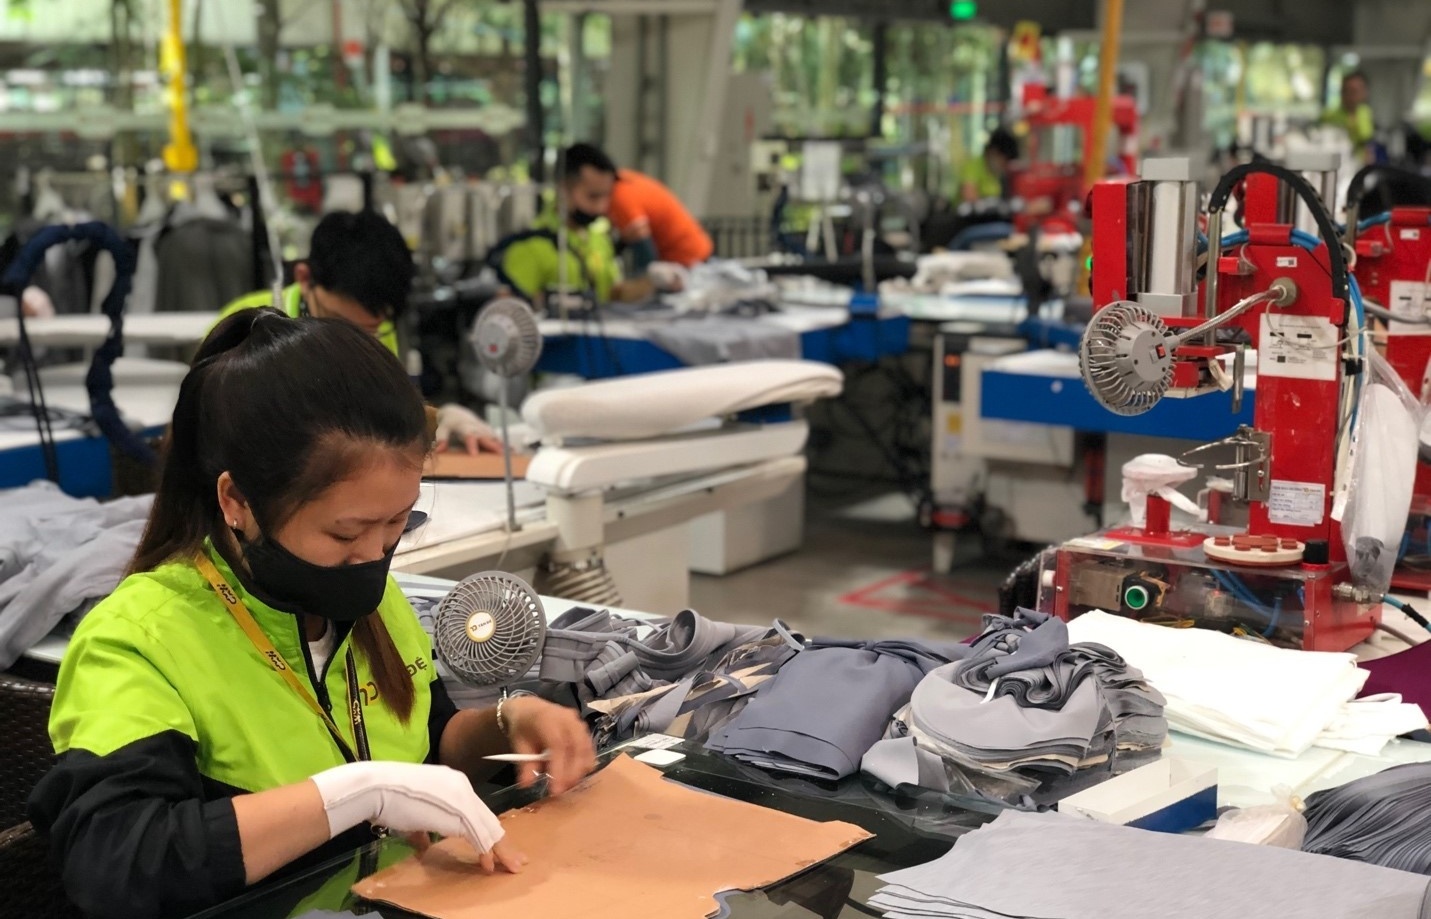 GIZ and Decathlon join efforts to improve environmental performance in Vietnam